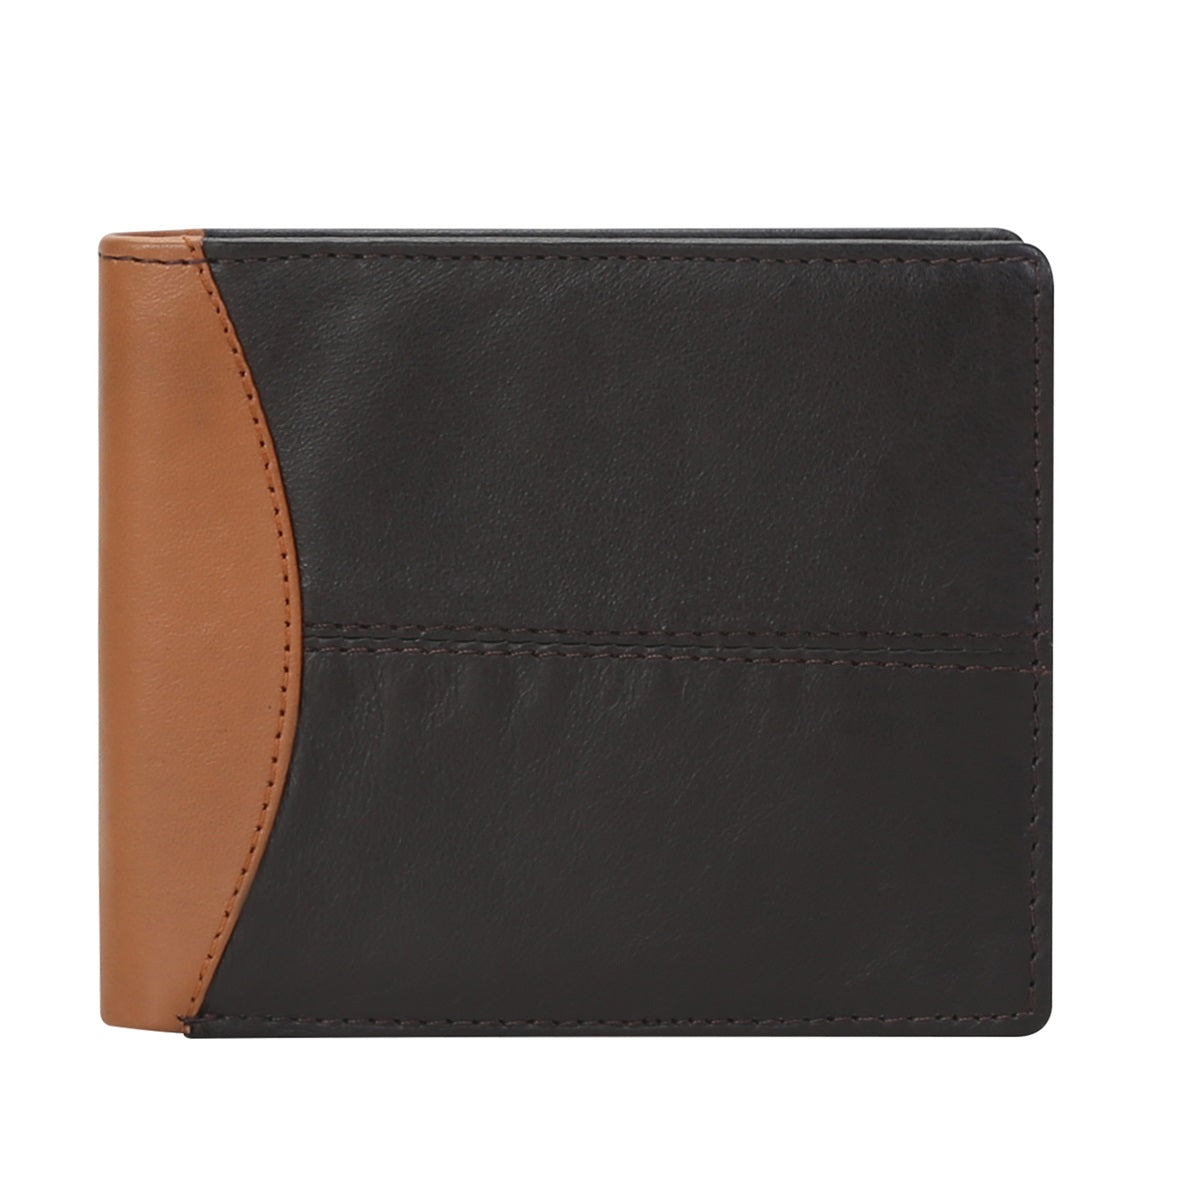 Dk. Brown With Tan Color Combination Leather Wallet For Men By Brune